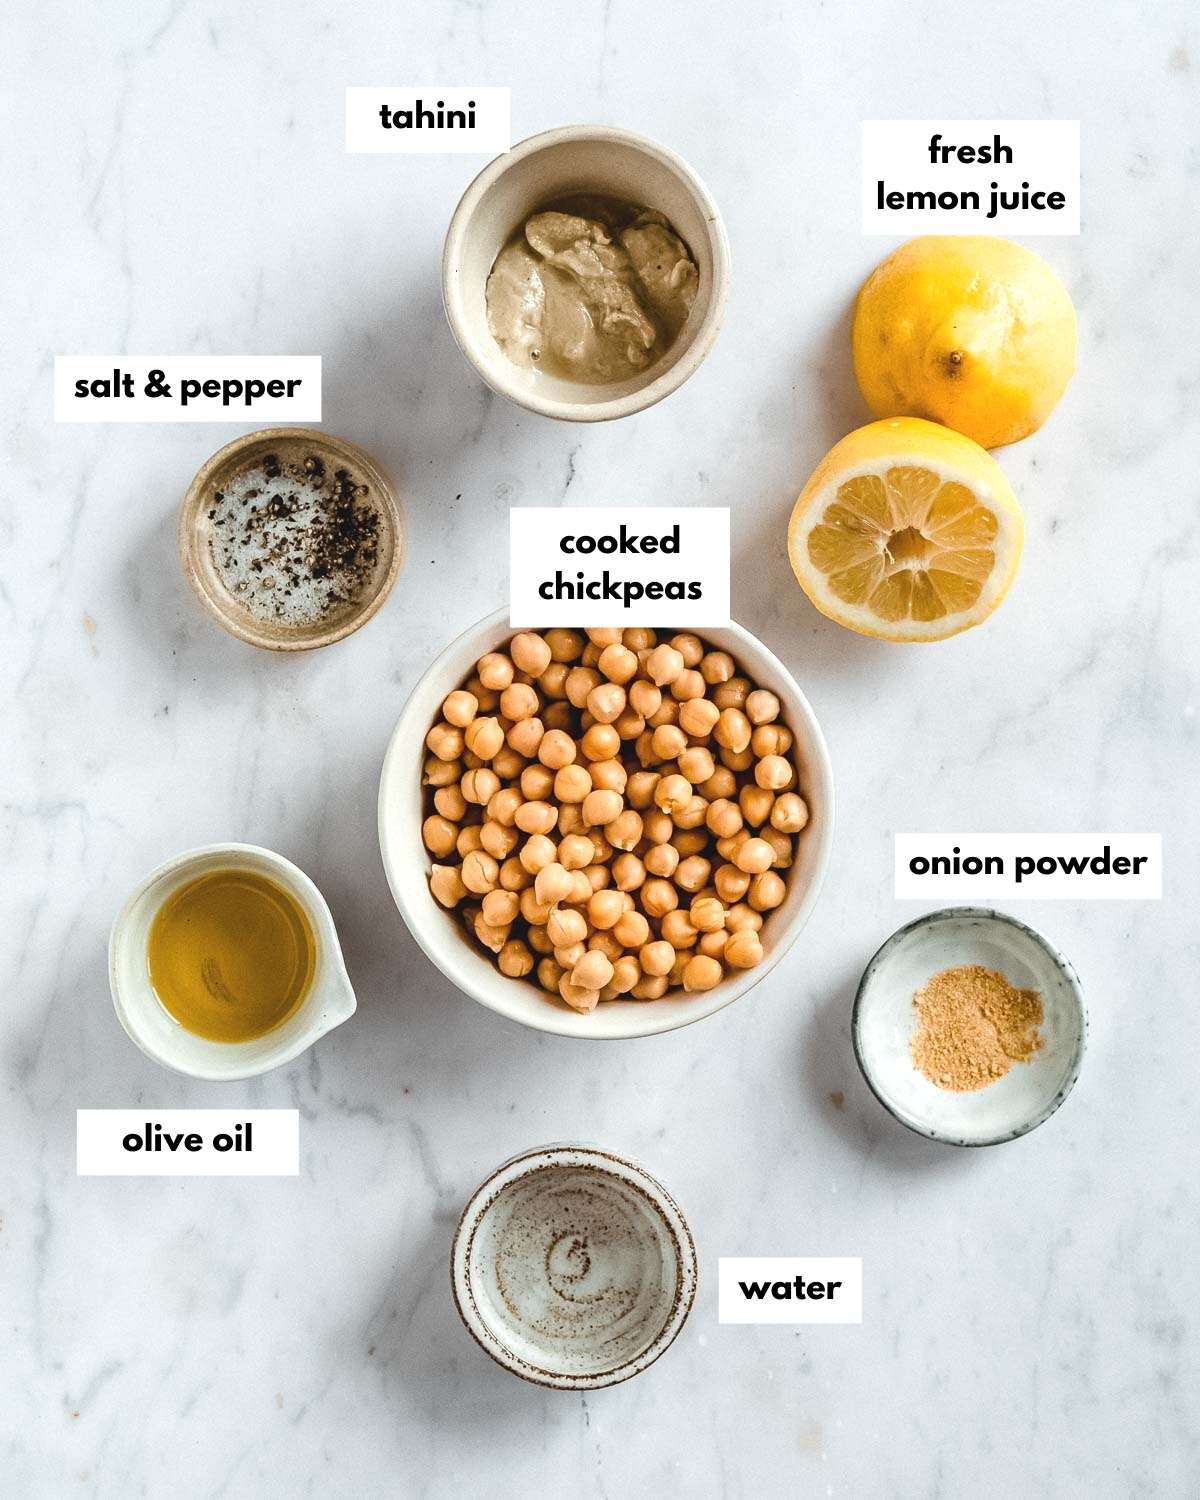 all ingredients needed to make hummus without garlic.